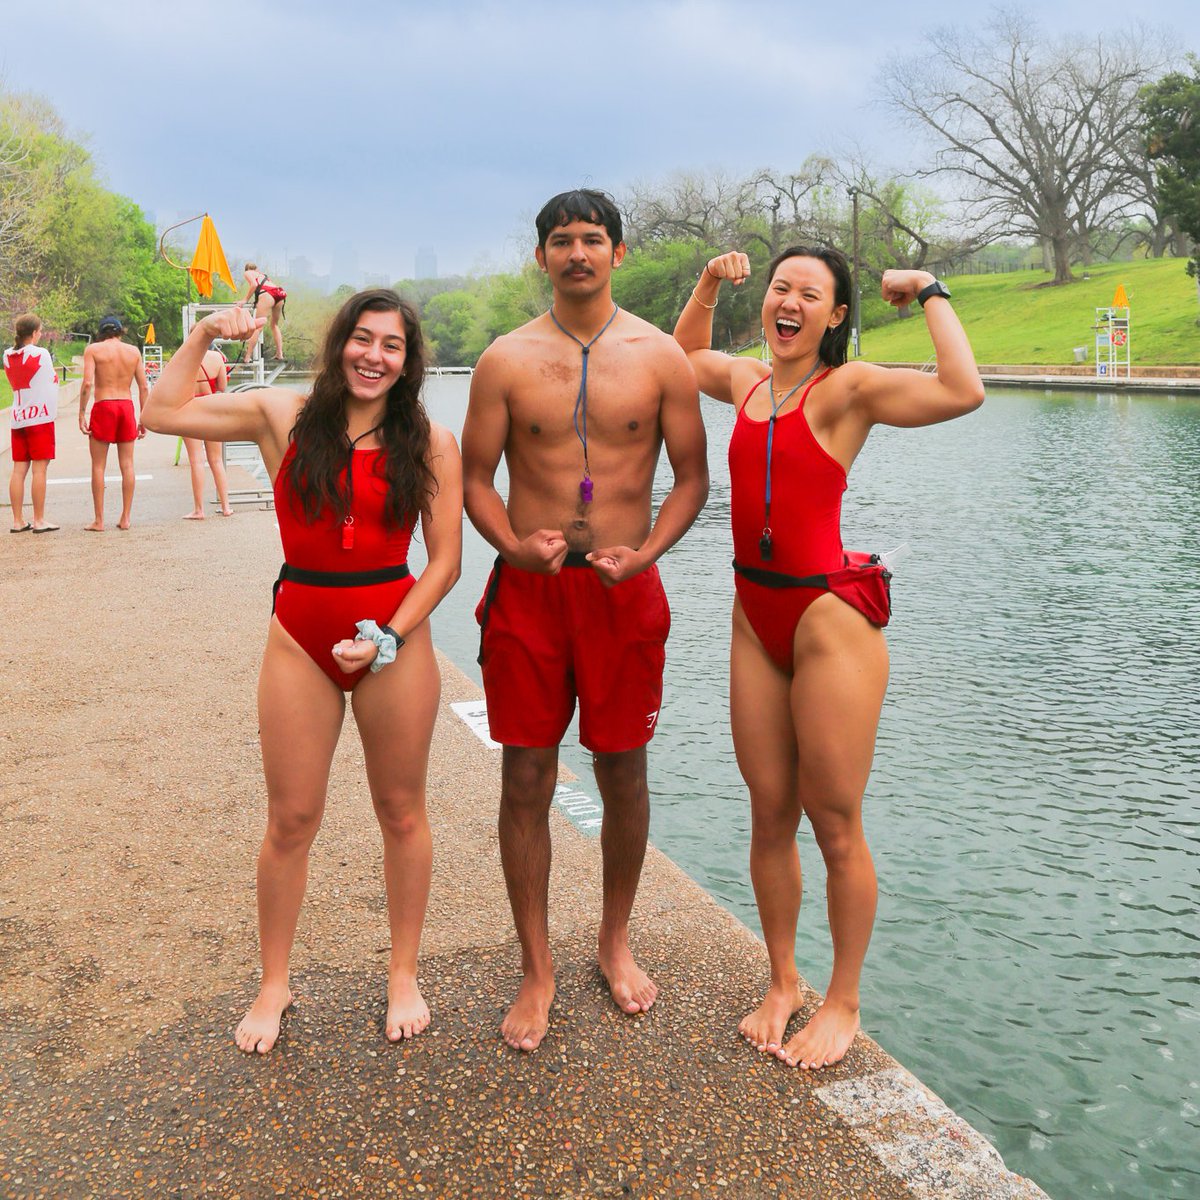 Work with great people and have fun! Now hiring LIFEGUARDS ages 15+ starting at $20.80/hr plus a $400 training stipend after 80 hours worked. Hiring Event Fri 5/17 4 -8pm Aquatic Office, 2818 San Gabriel St. Apply and register for classes at the event. LifeguardAustin.com